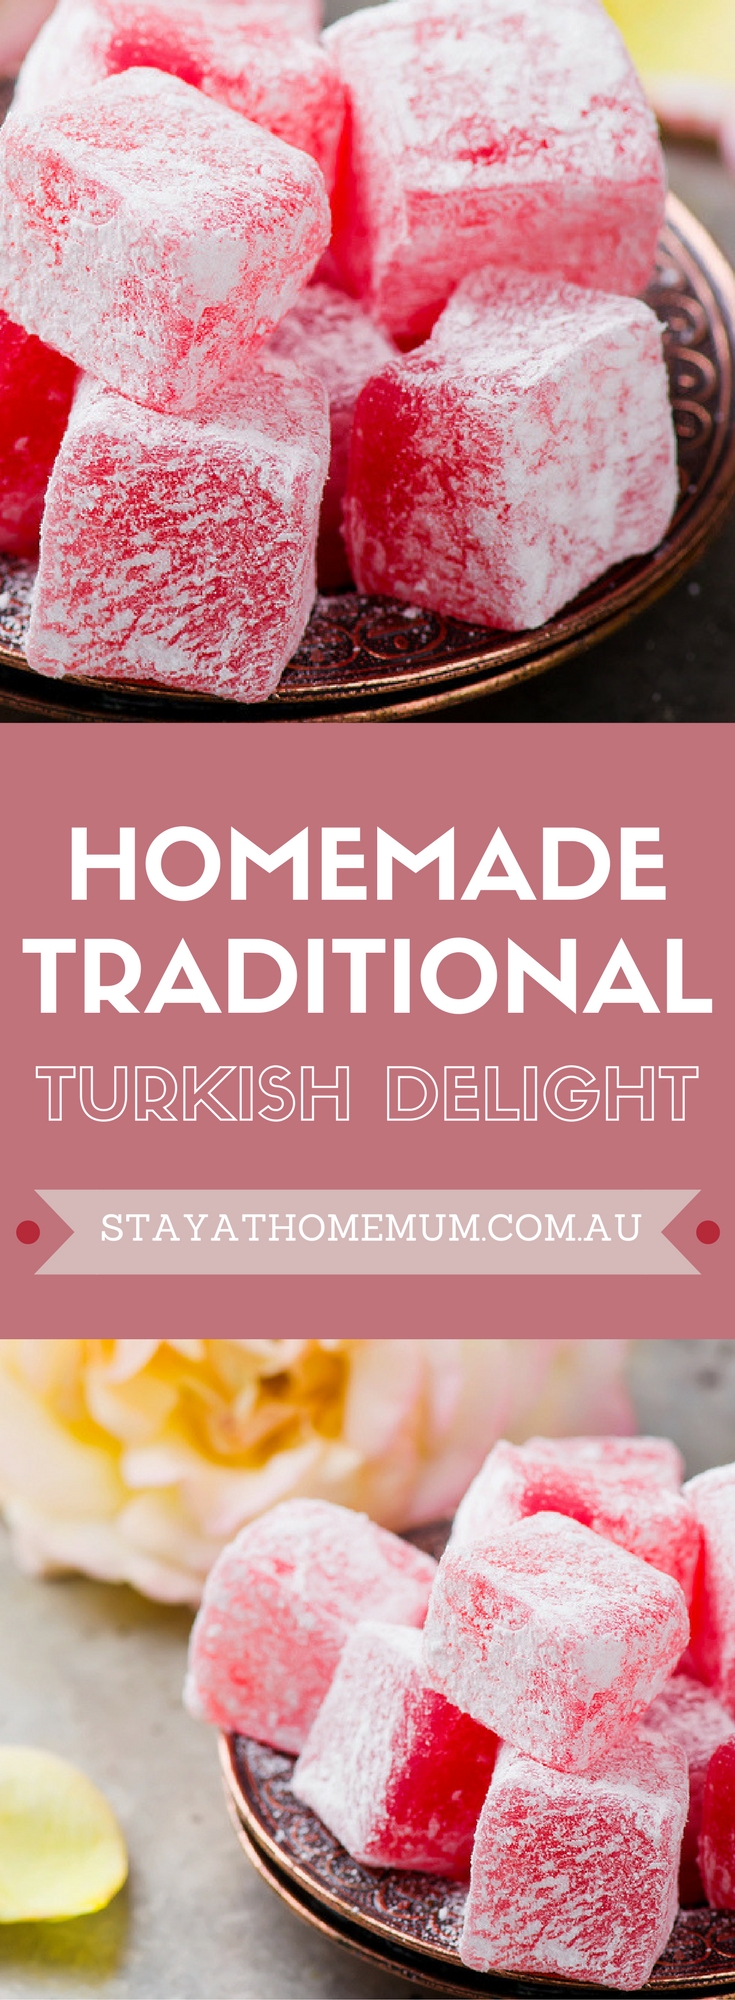 Homemade Turkish Delight | Stay at Home Mum